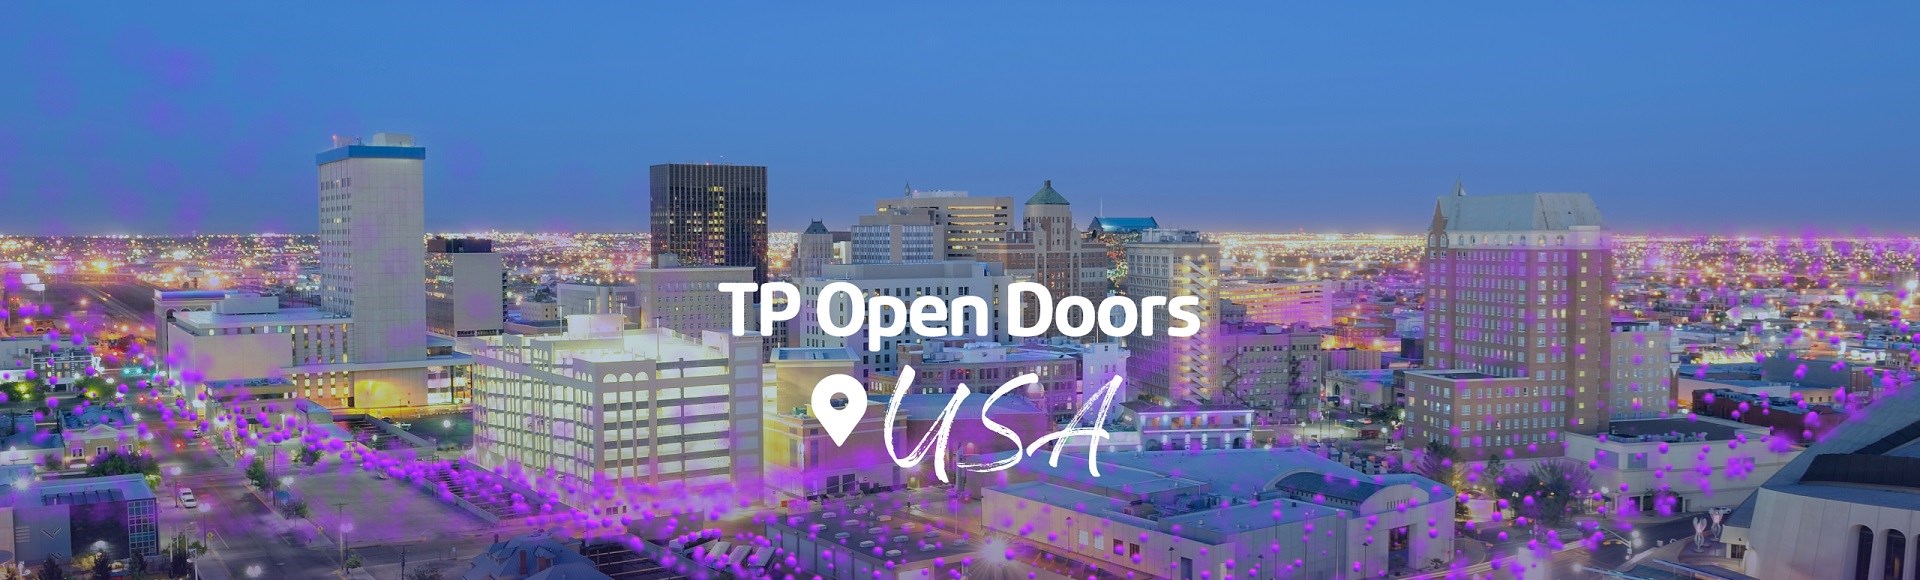 “TP Open Doors” Welcomes You to the USA!